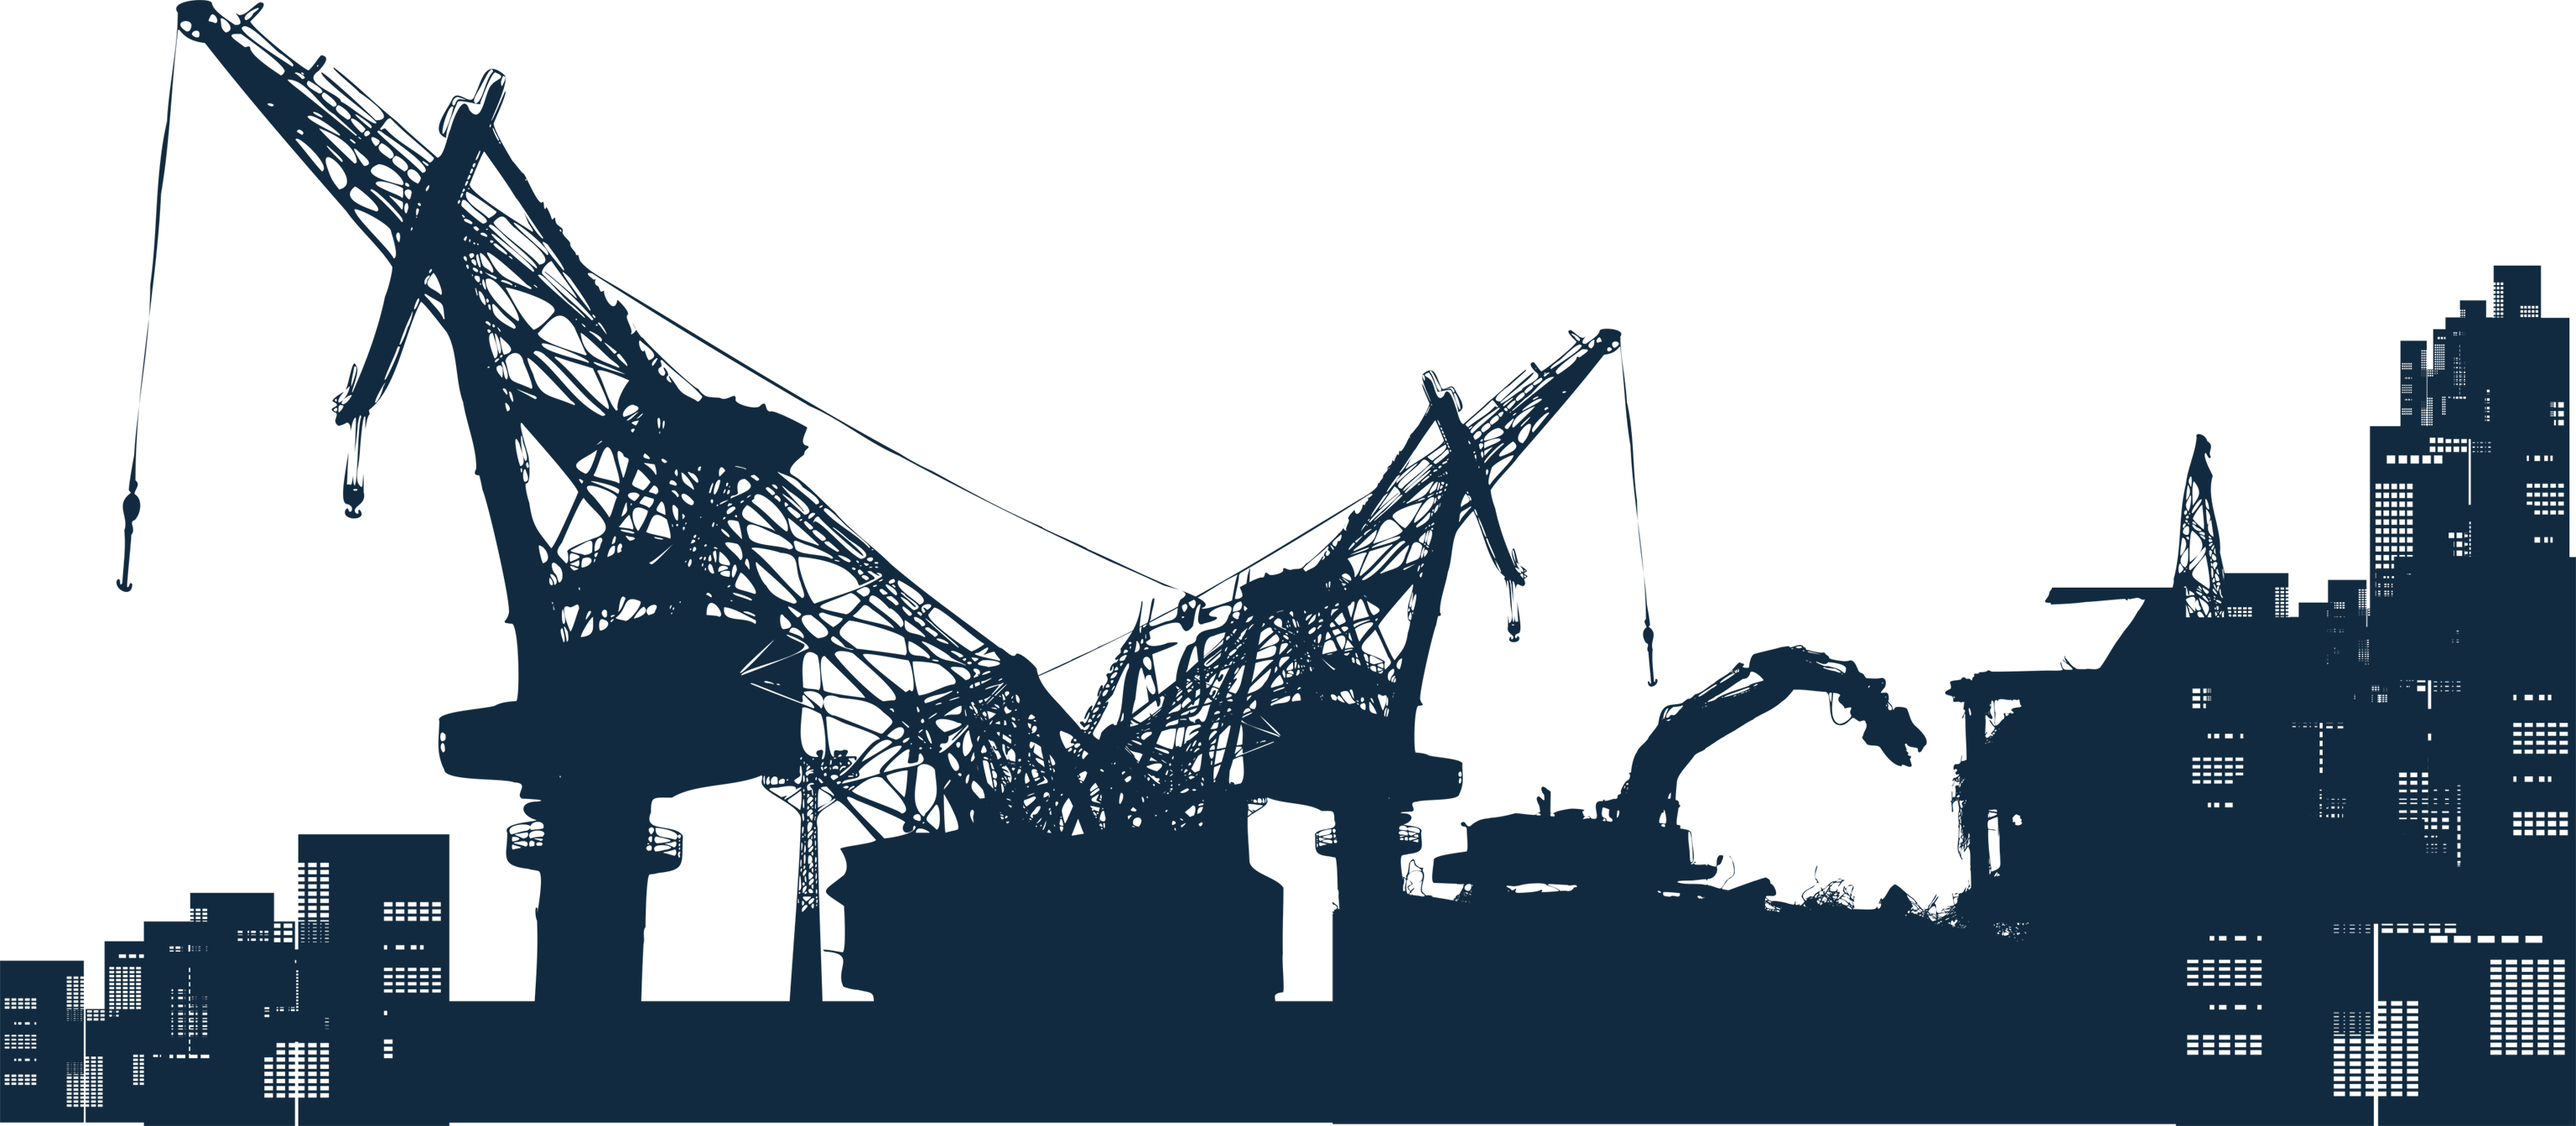 Download Heavy City Silhouette Construction Site Equipment Engineering